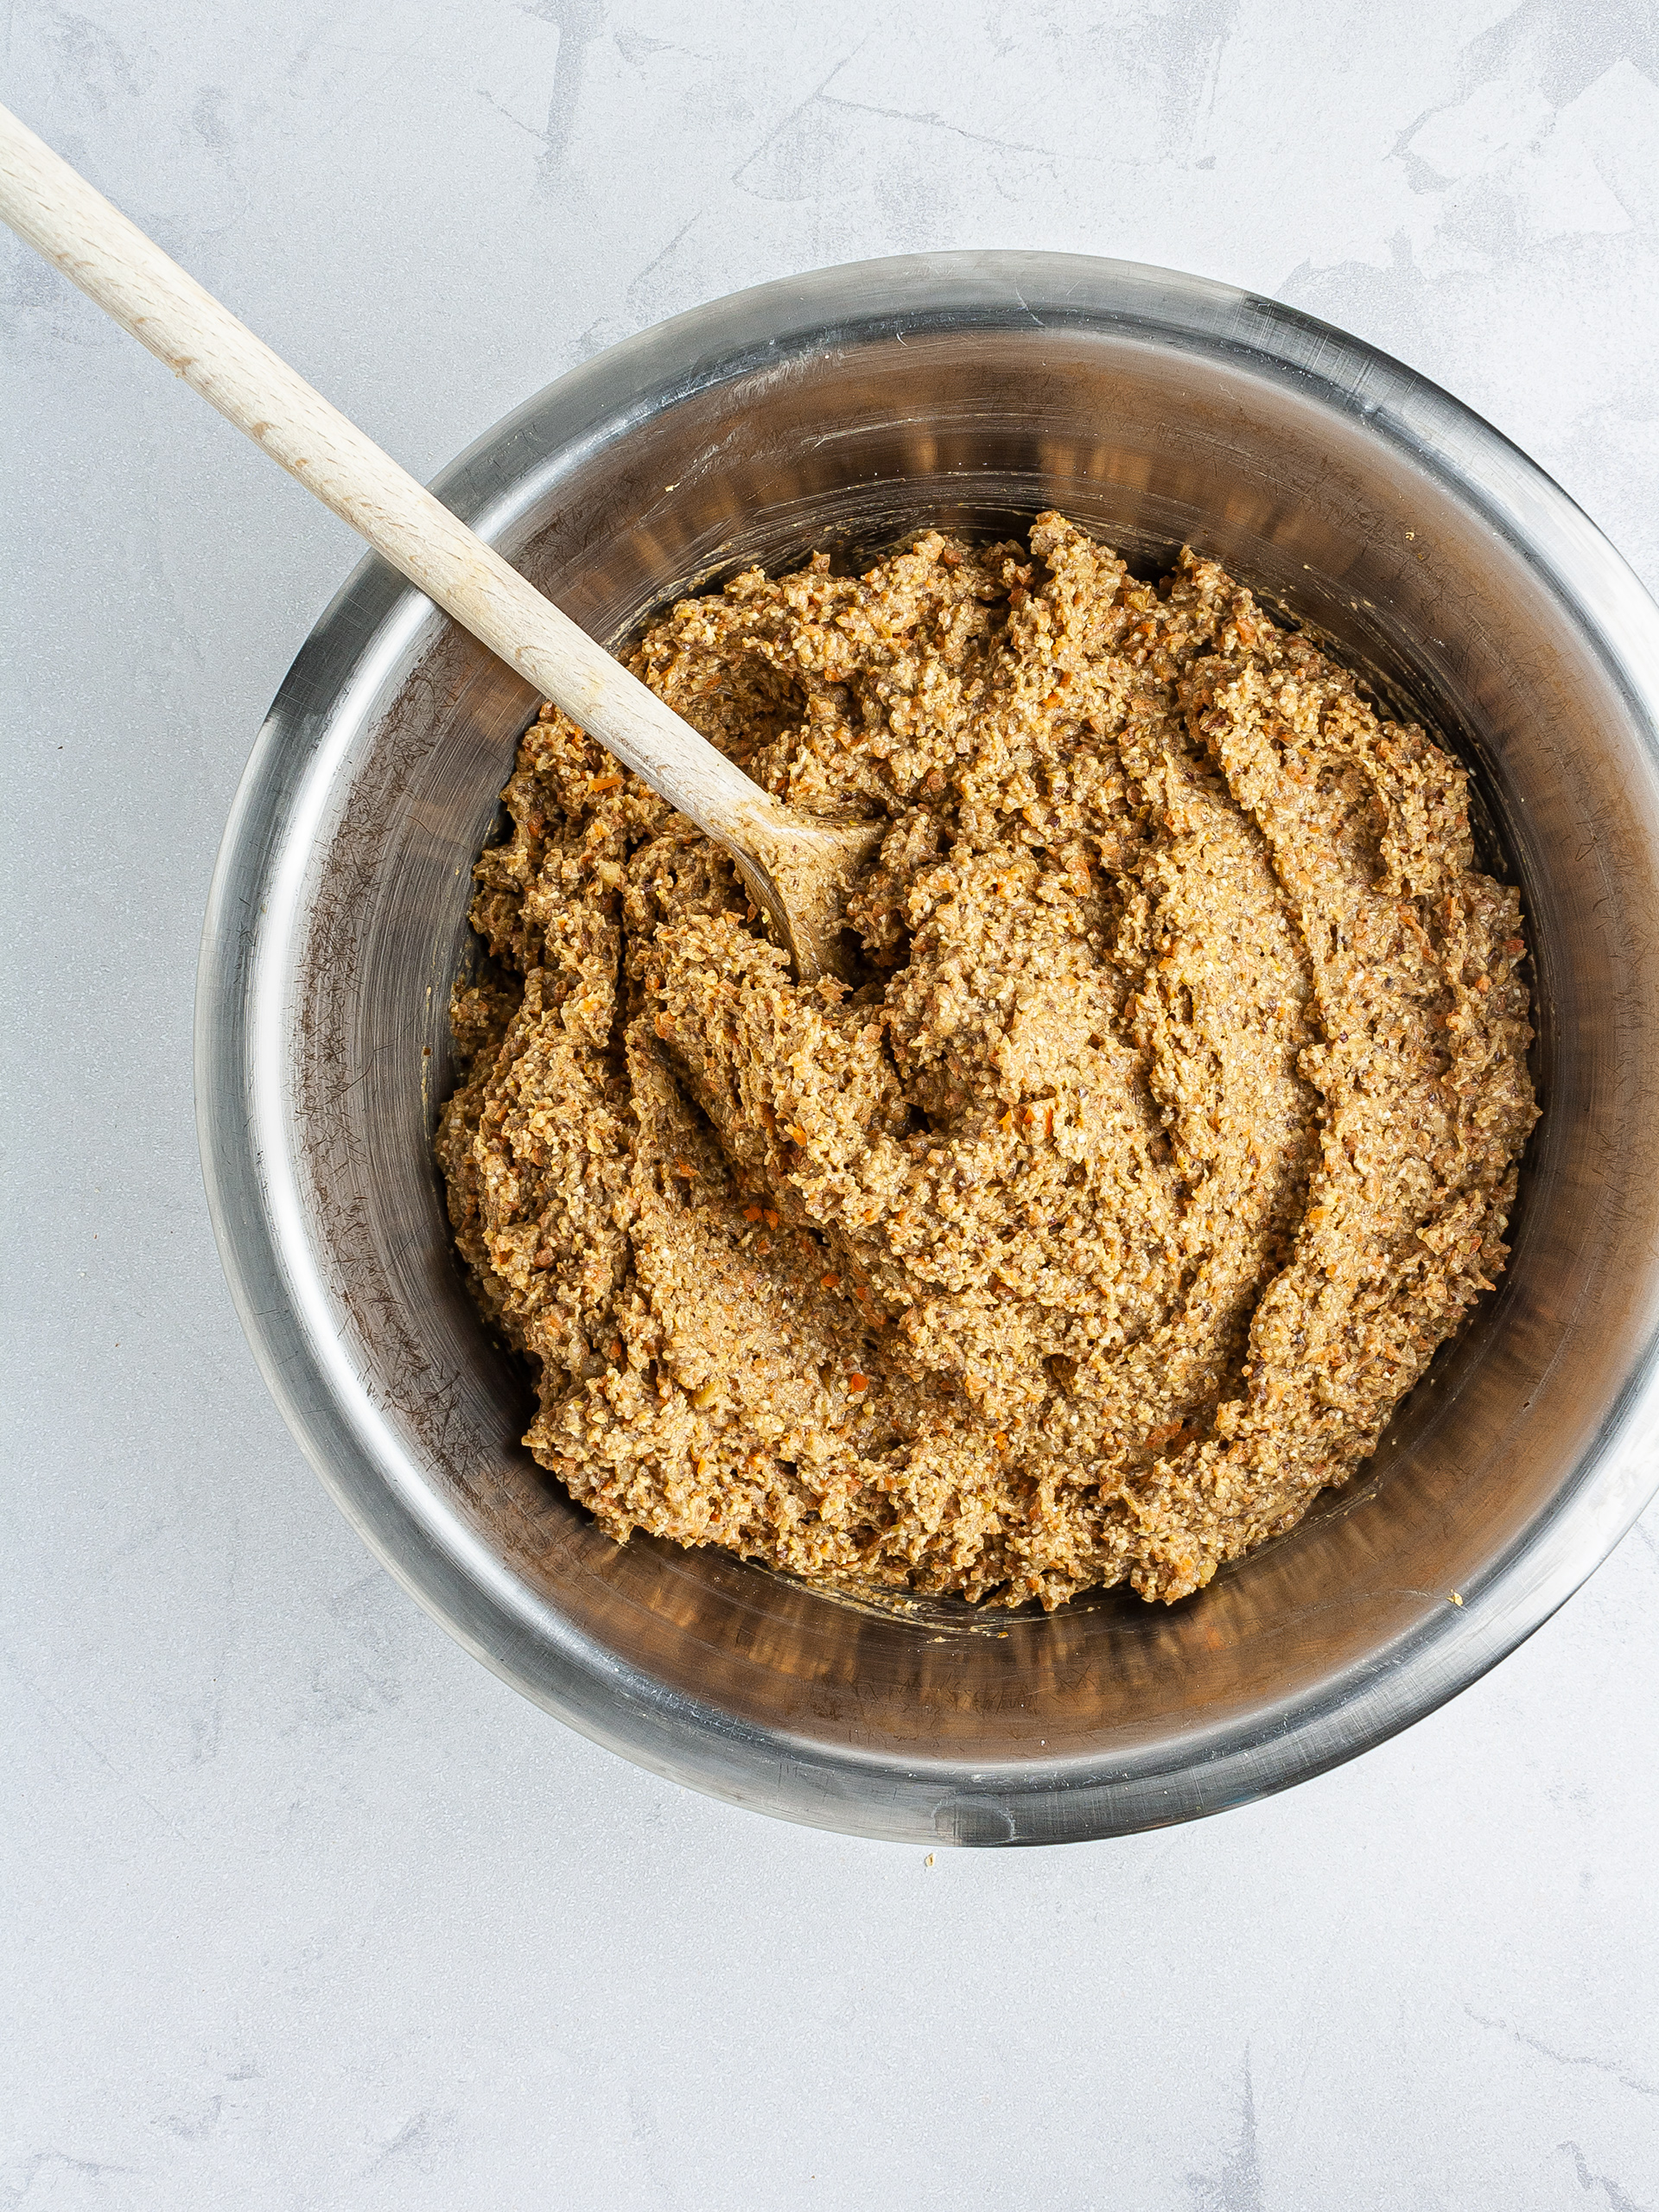 Carrot cake batter with oat flour and almond milk.